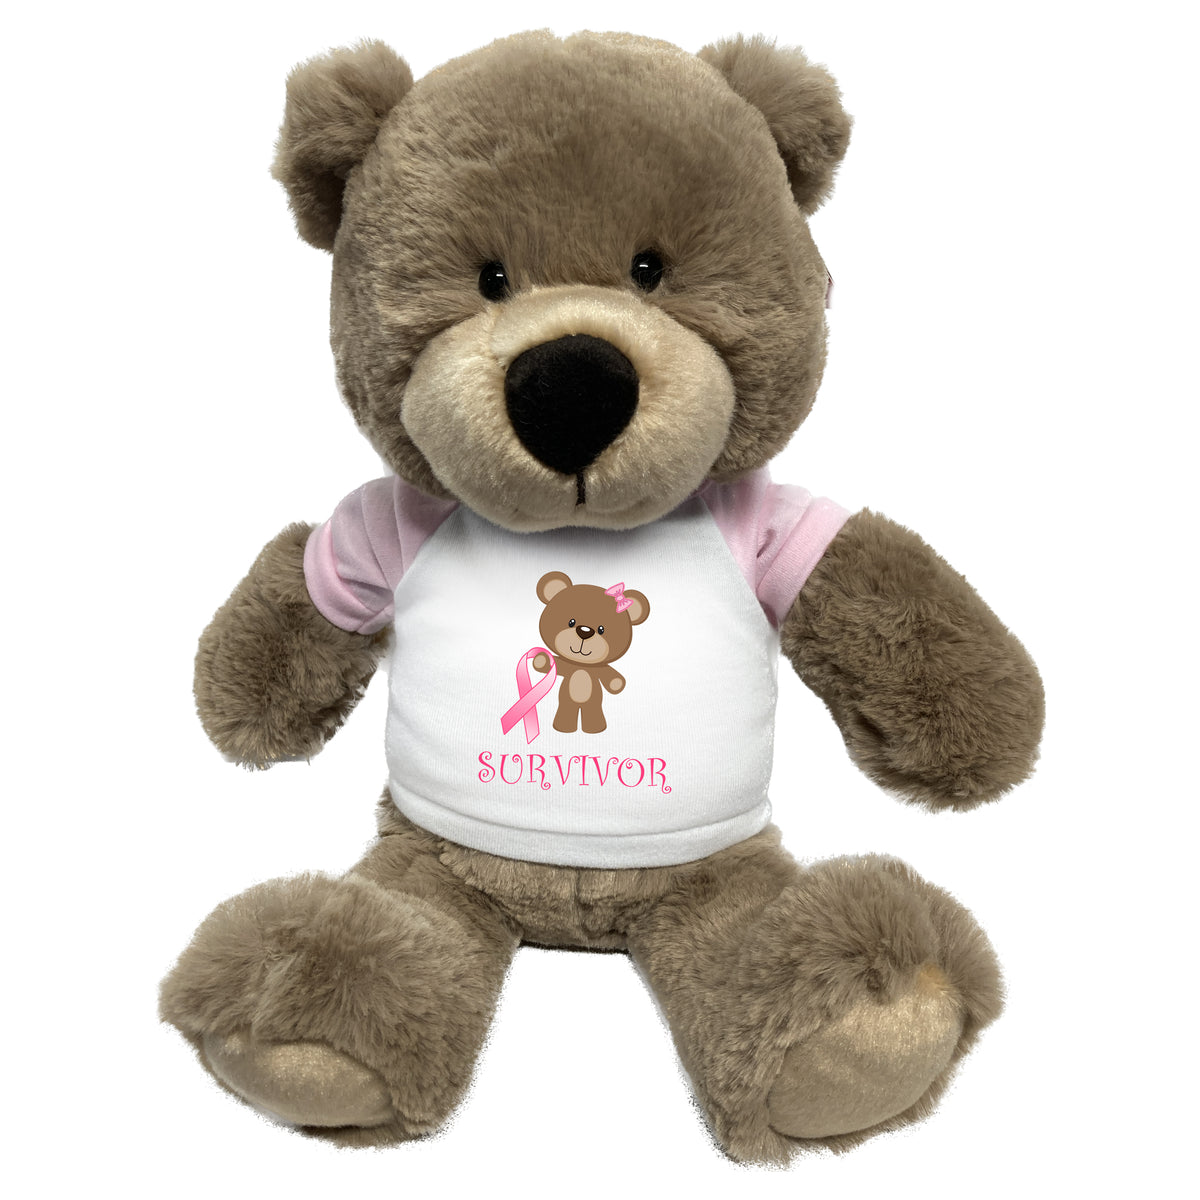 Breast Cancer Support Teddy Bear - Personalized 14 Inch Taupe Bear, Survivor Design